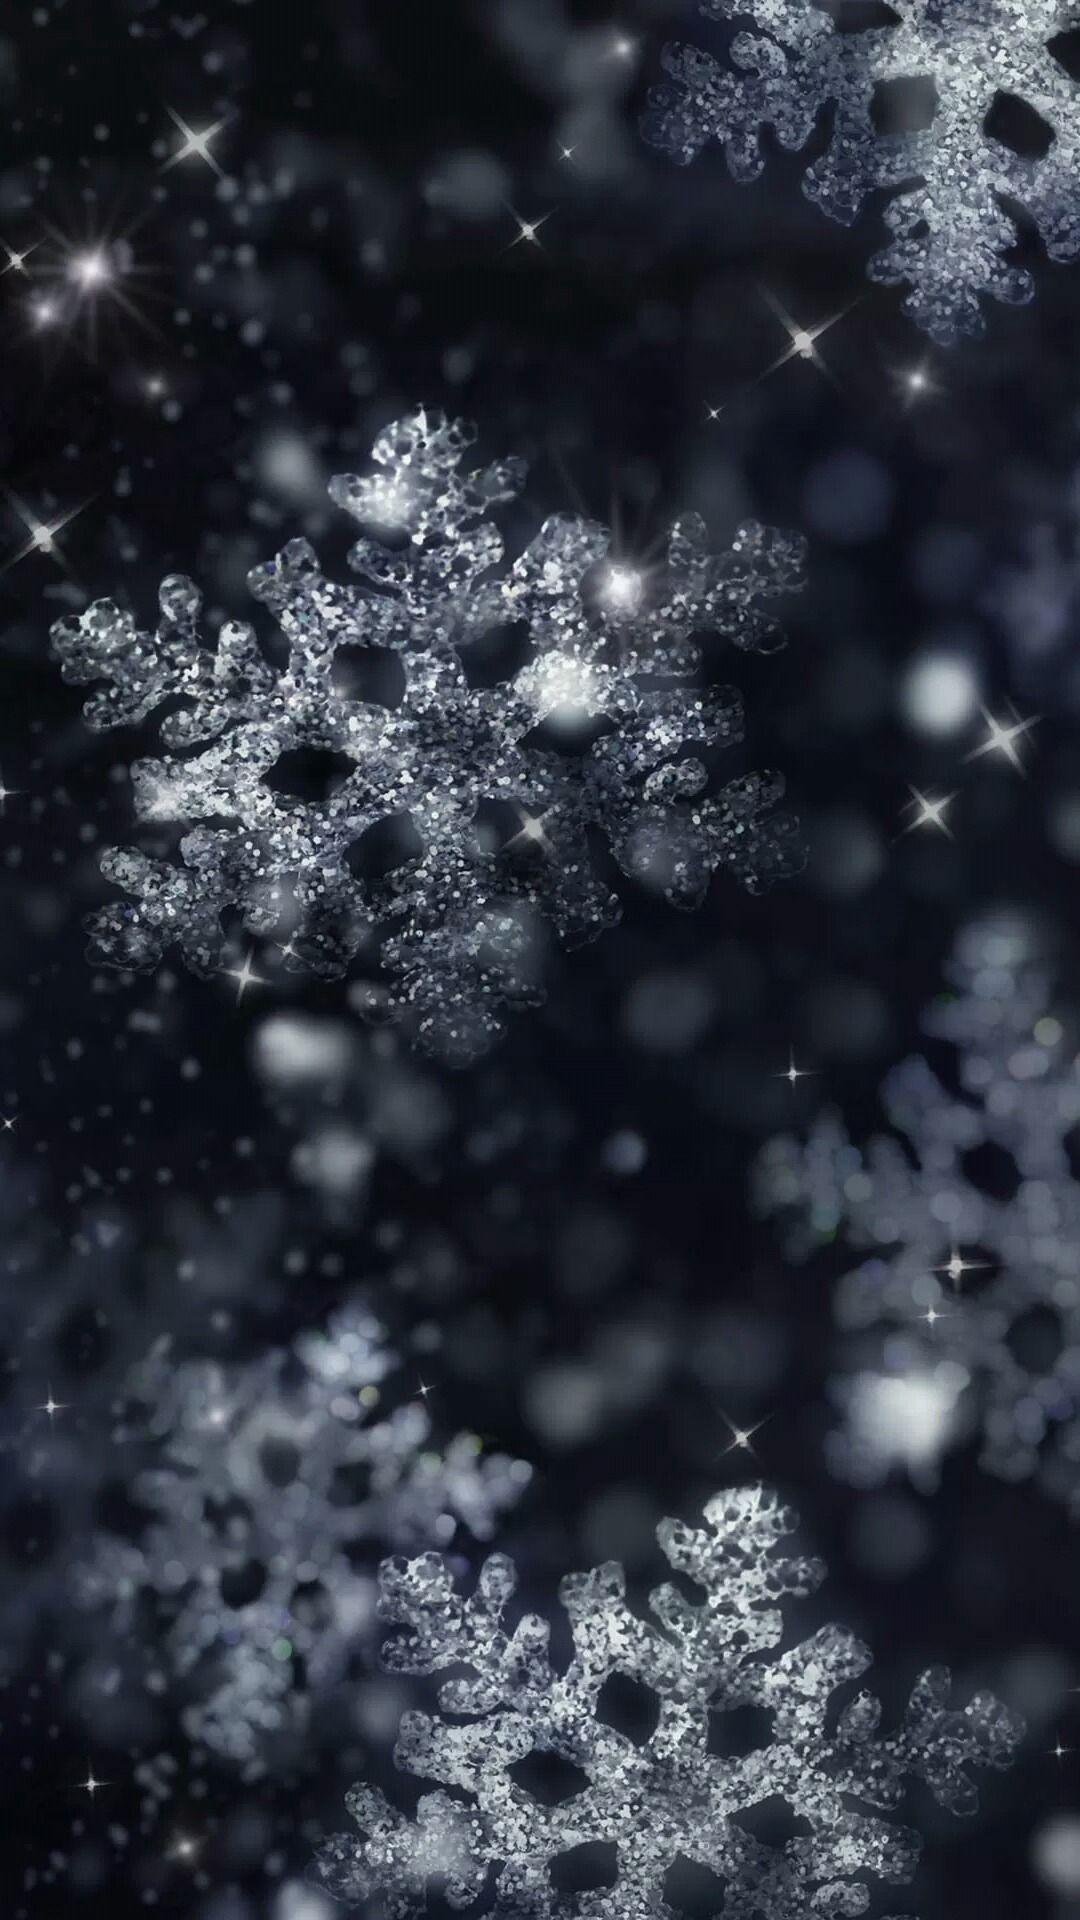 Night glittering snowflakes to see more #beautiful #snow & #snowflakes. Wallpaper iphone christmas, Christmas wallpaper tumblr, Christmas phone wallpaper